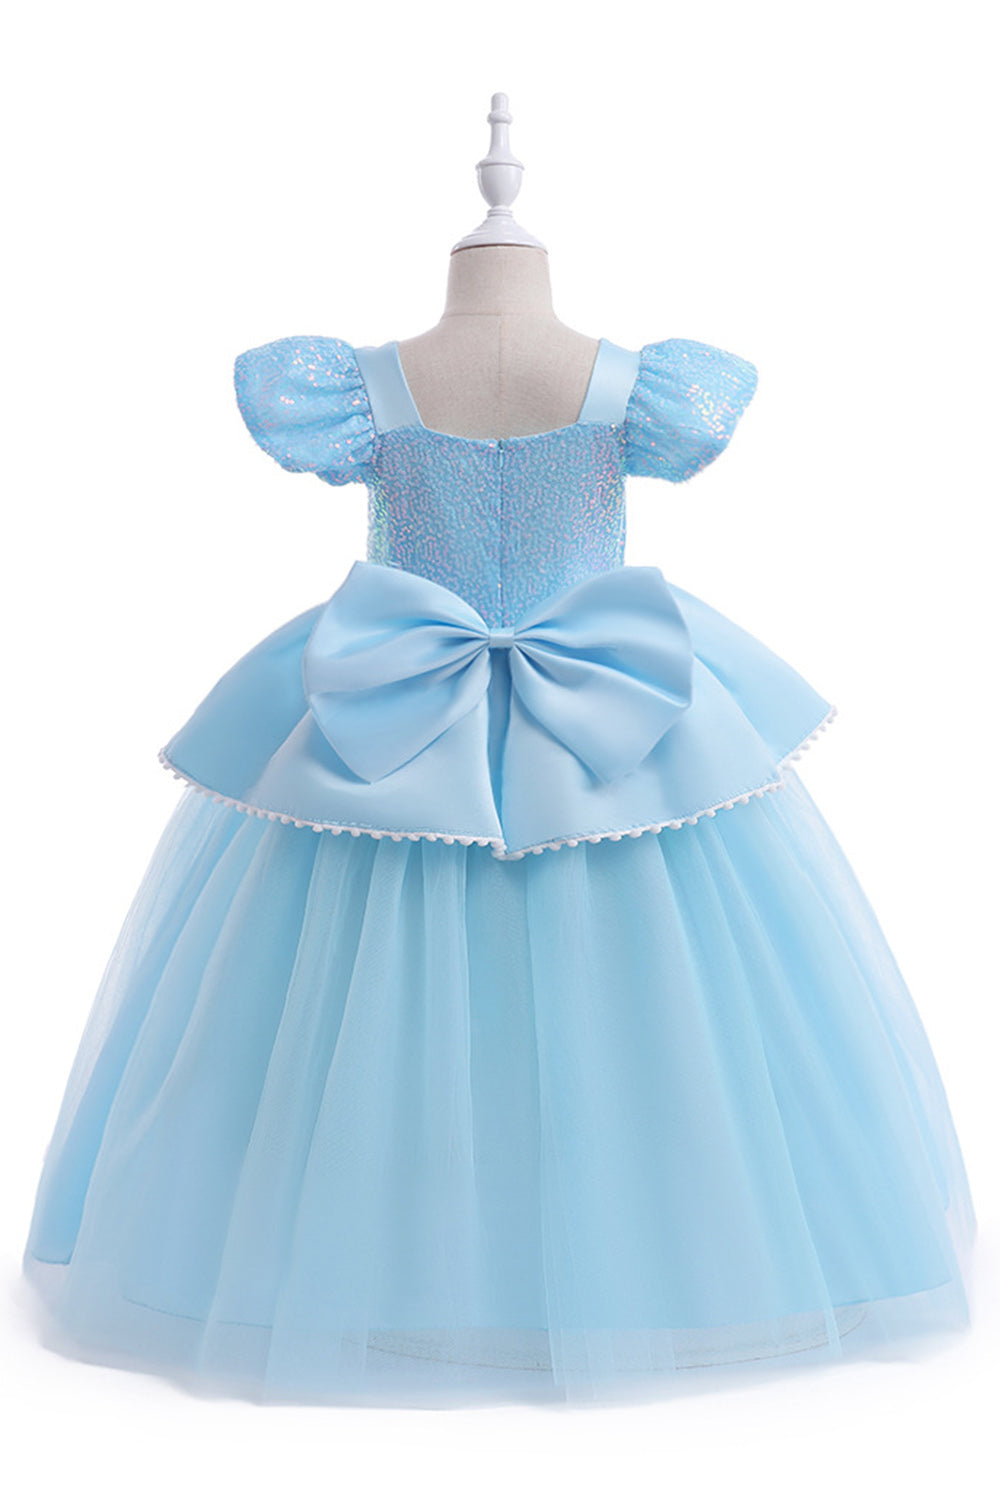 Blue Sequins Girl's Party Dress with Bow